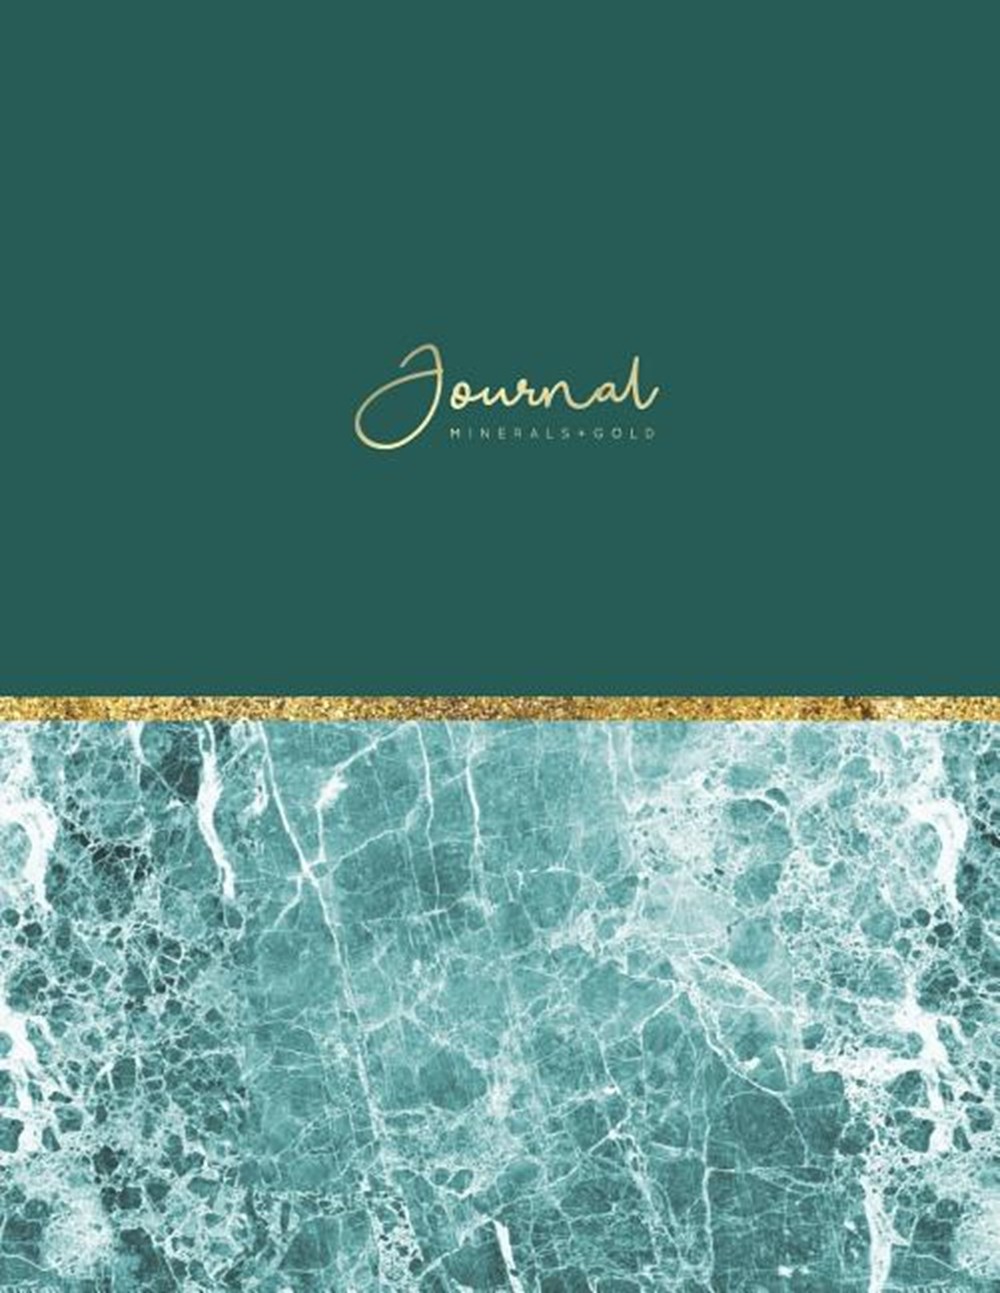 Journal Minerals + Gold: Luxury Black Geology Notebook - Lined 80-Page - Perfect Bound Cover